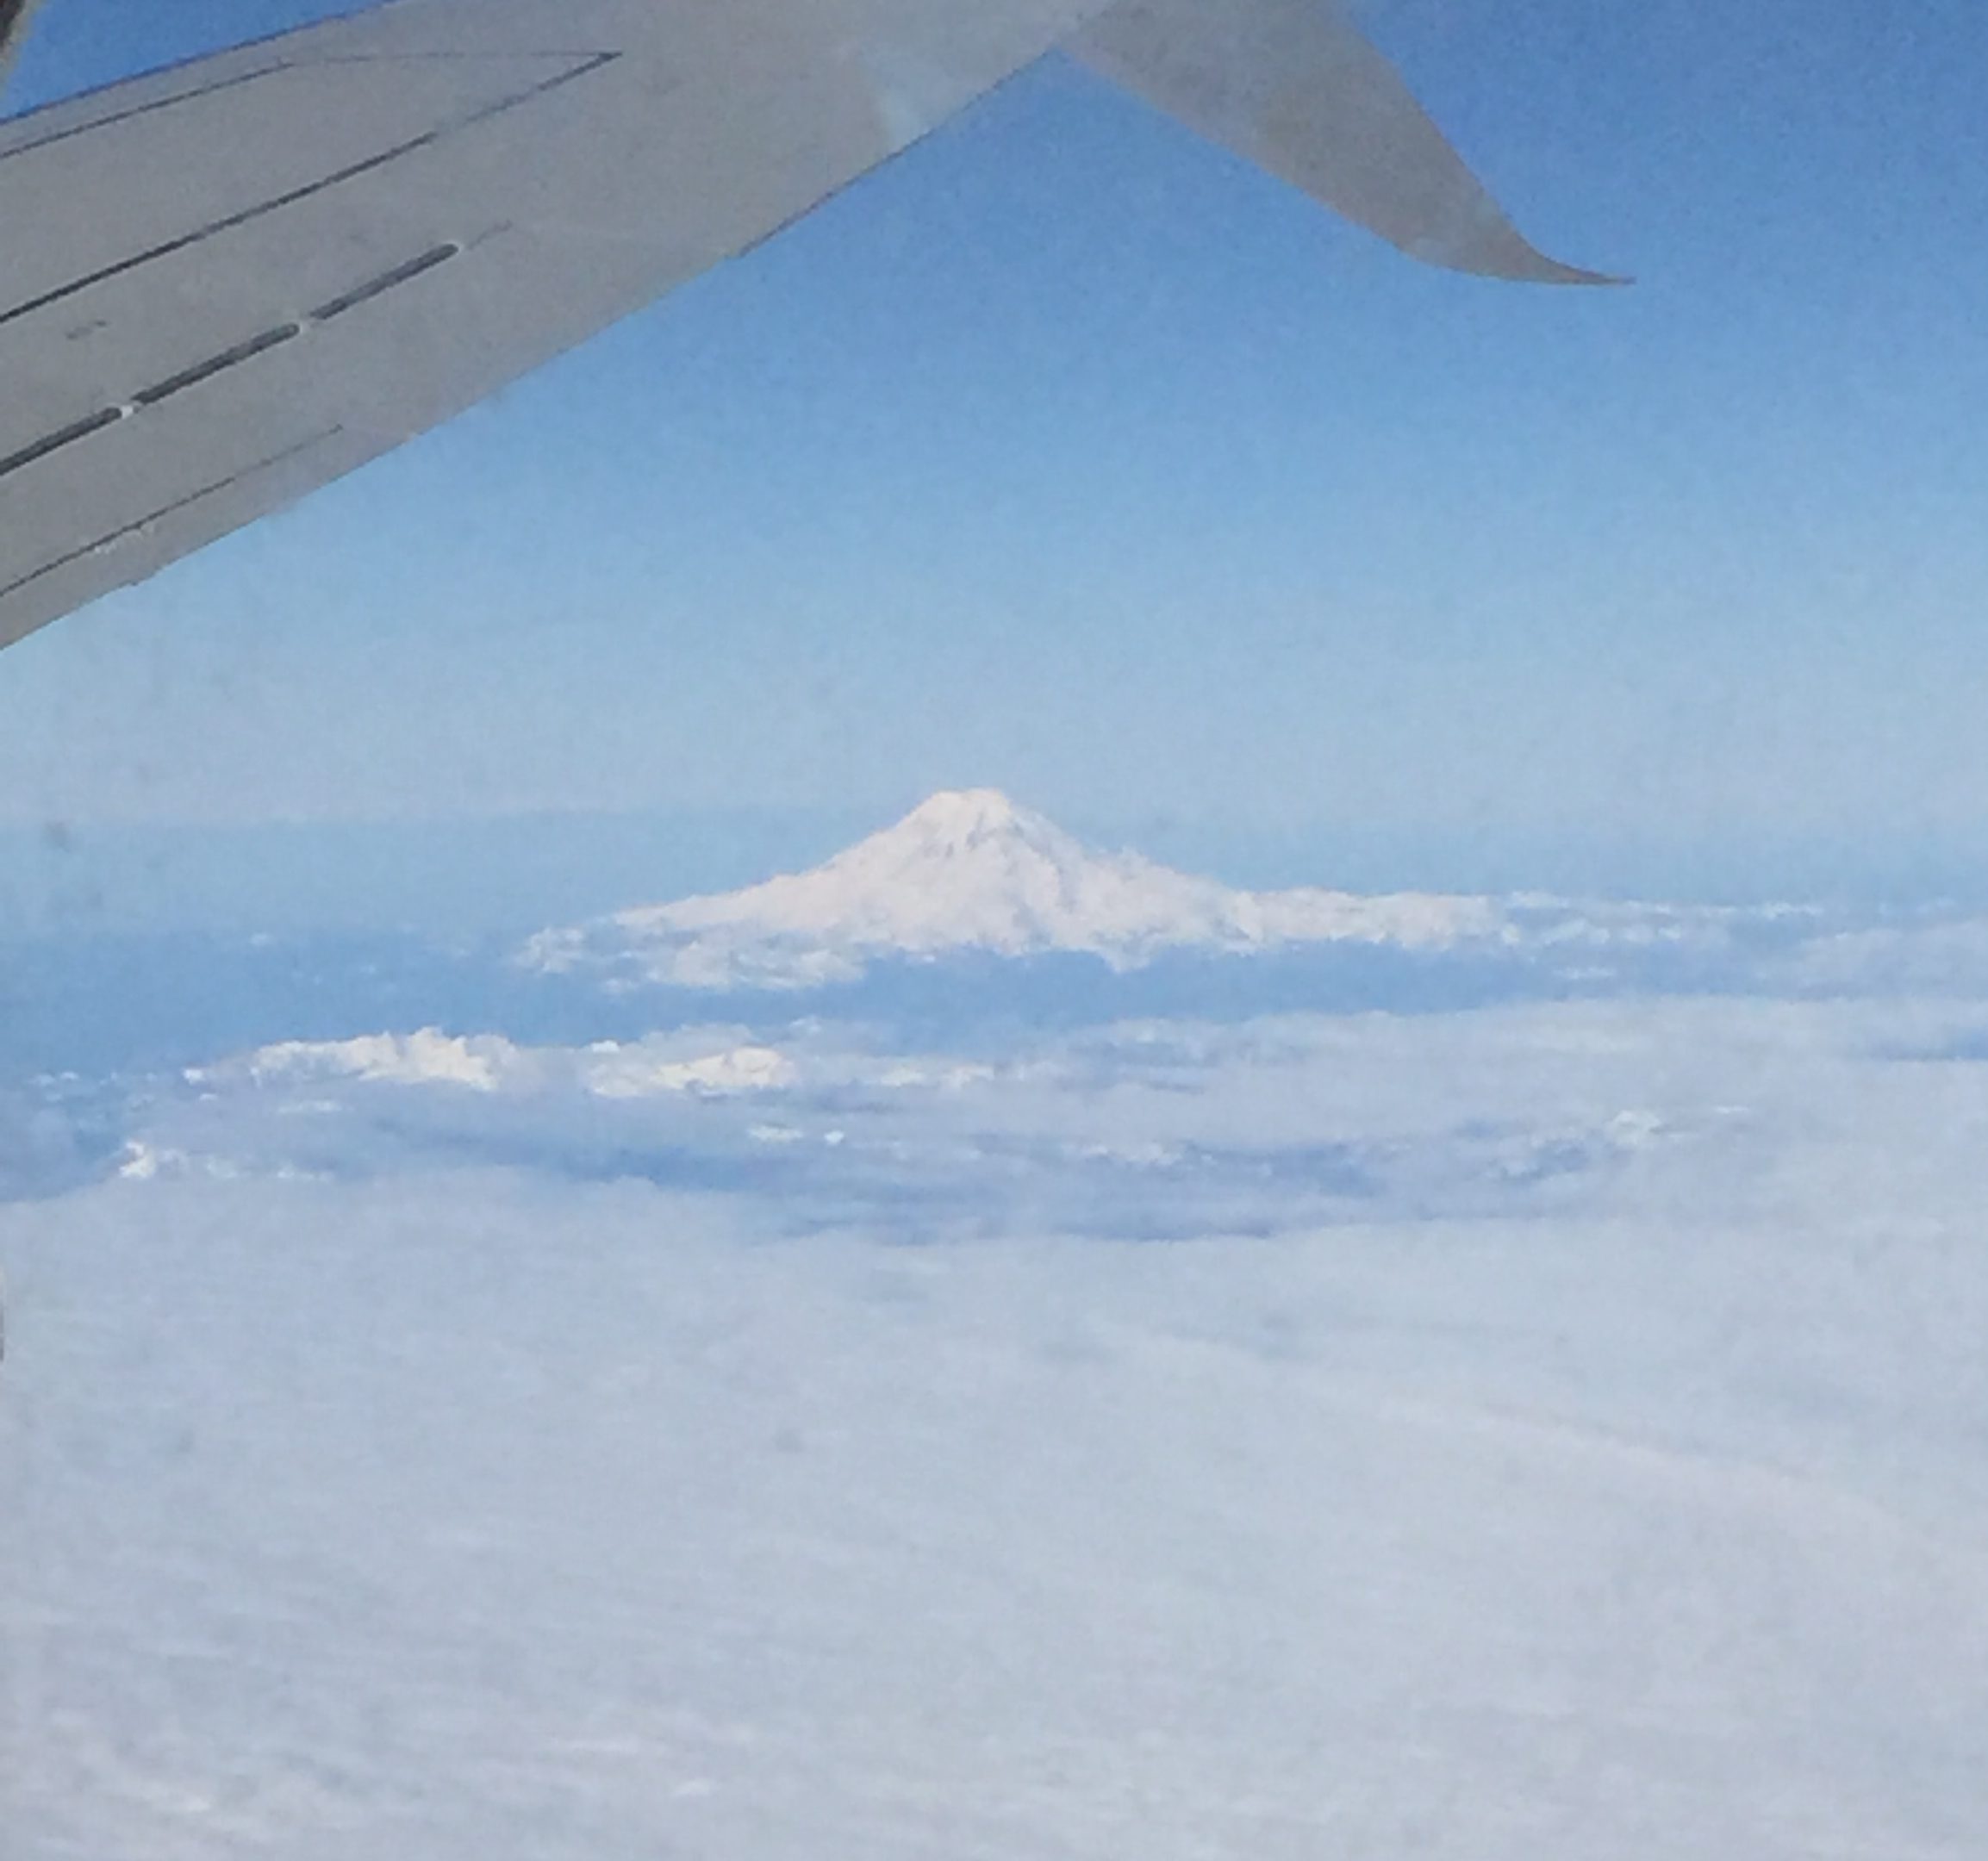 Mt. Hood from above Minnesota and New York trickled into PDX Wednesday to crystal blue skies and brilliant sunlight illuminating Mt. Hood